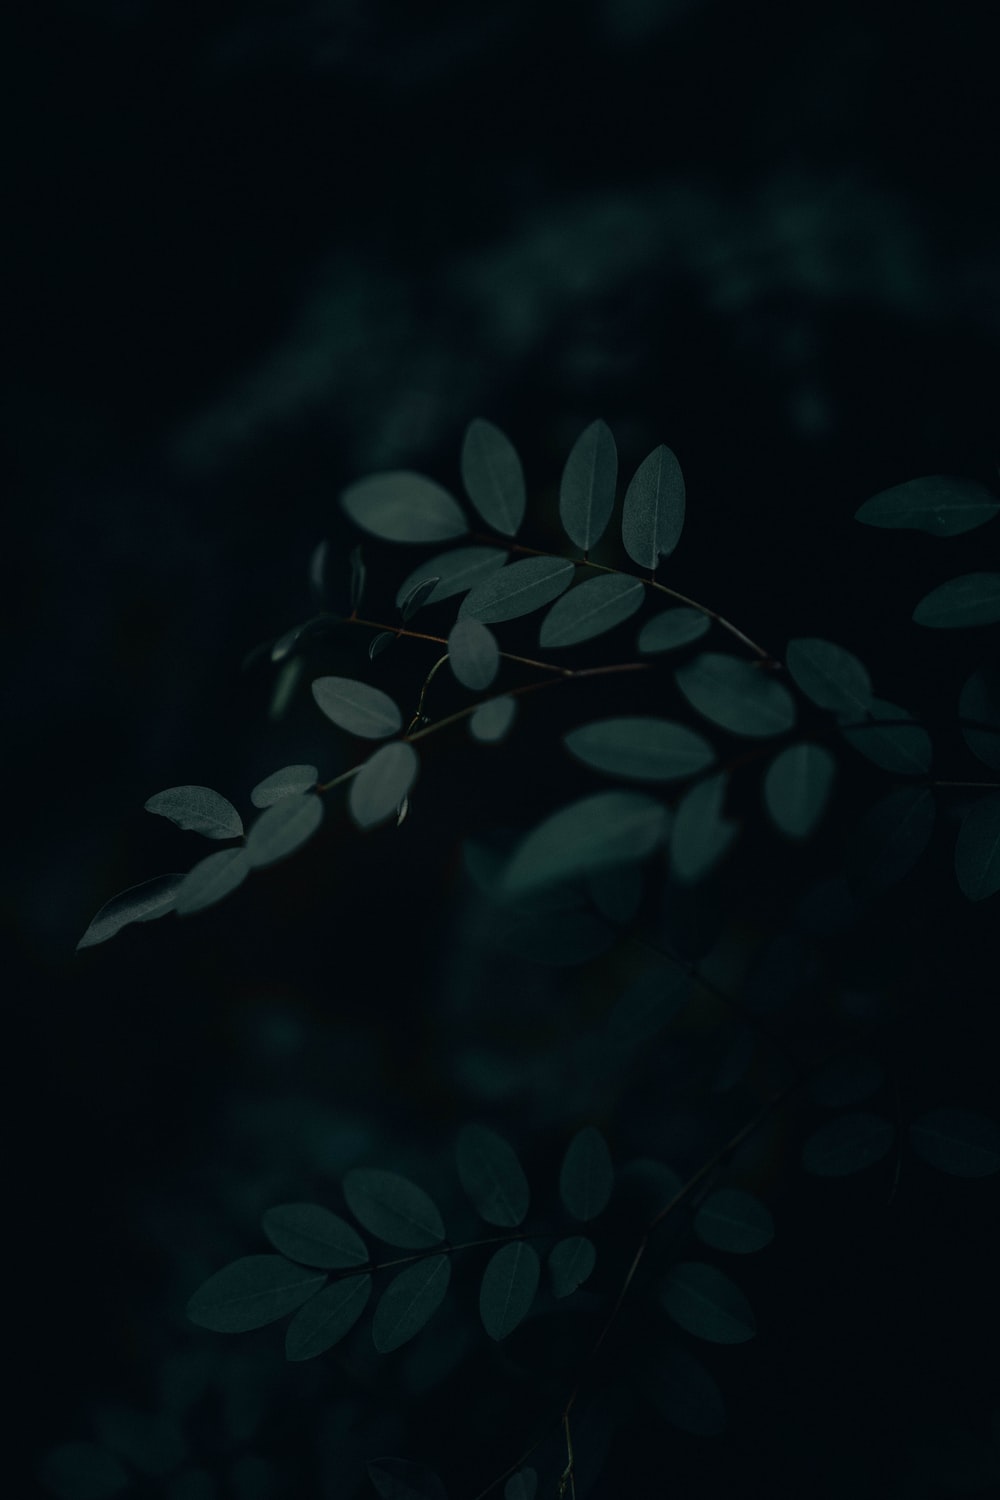 green leaves in black background photo